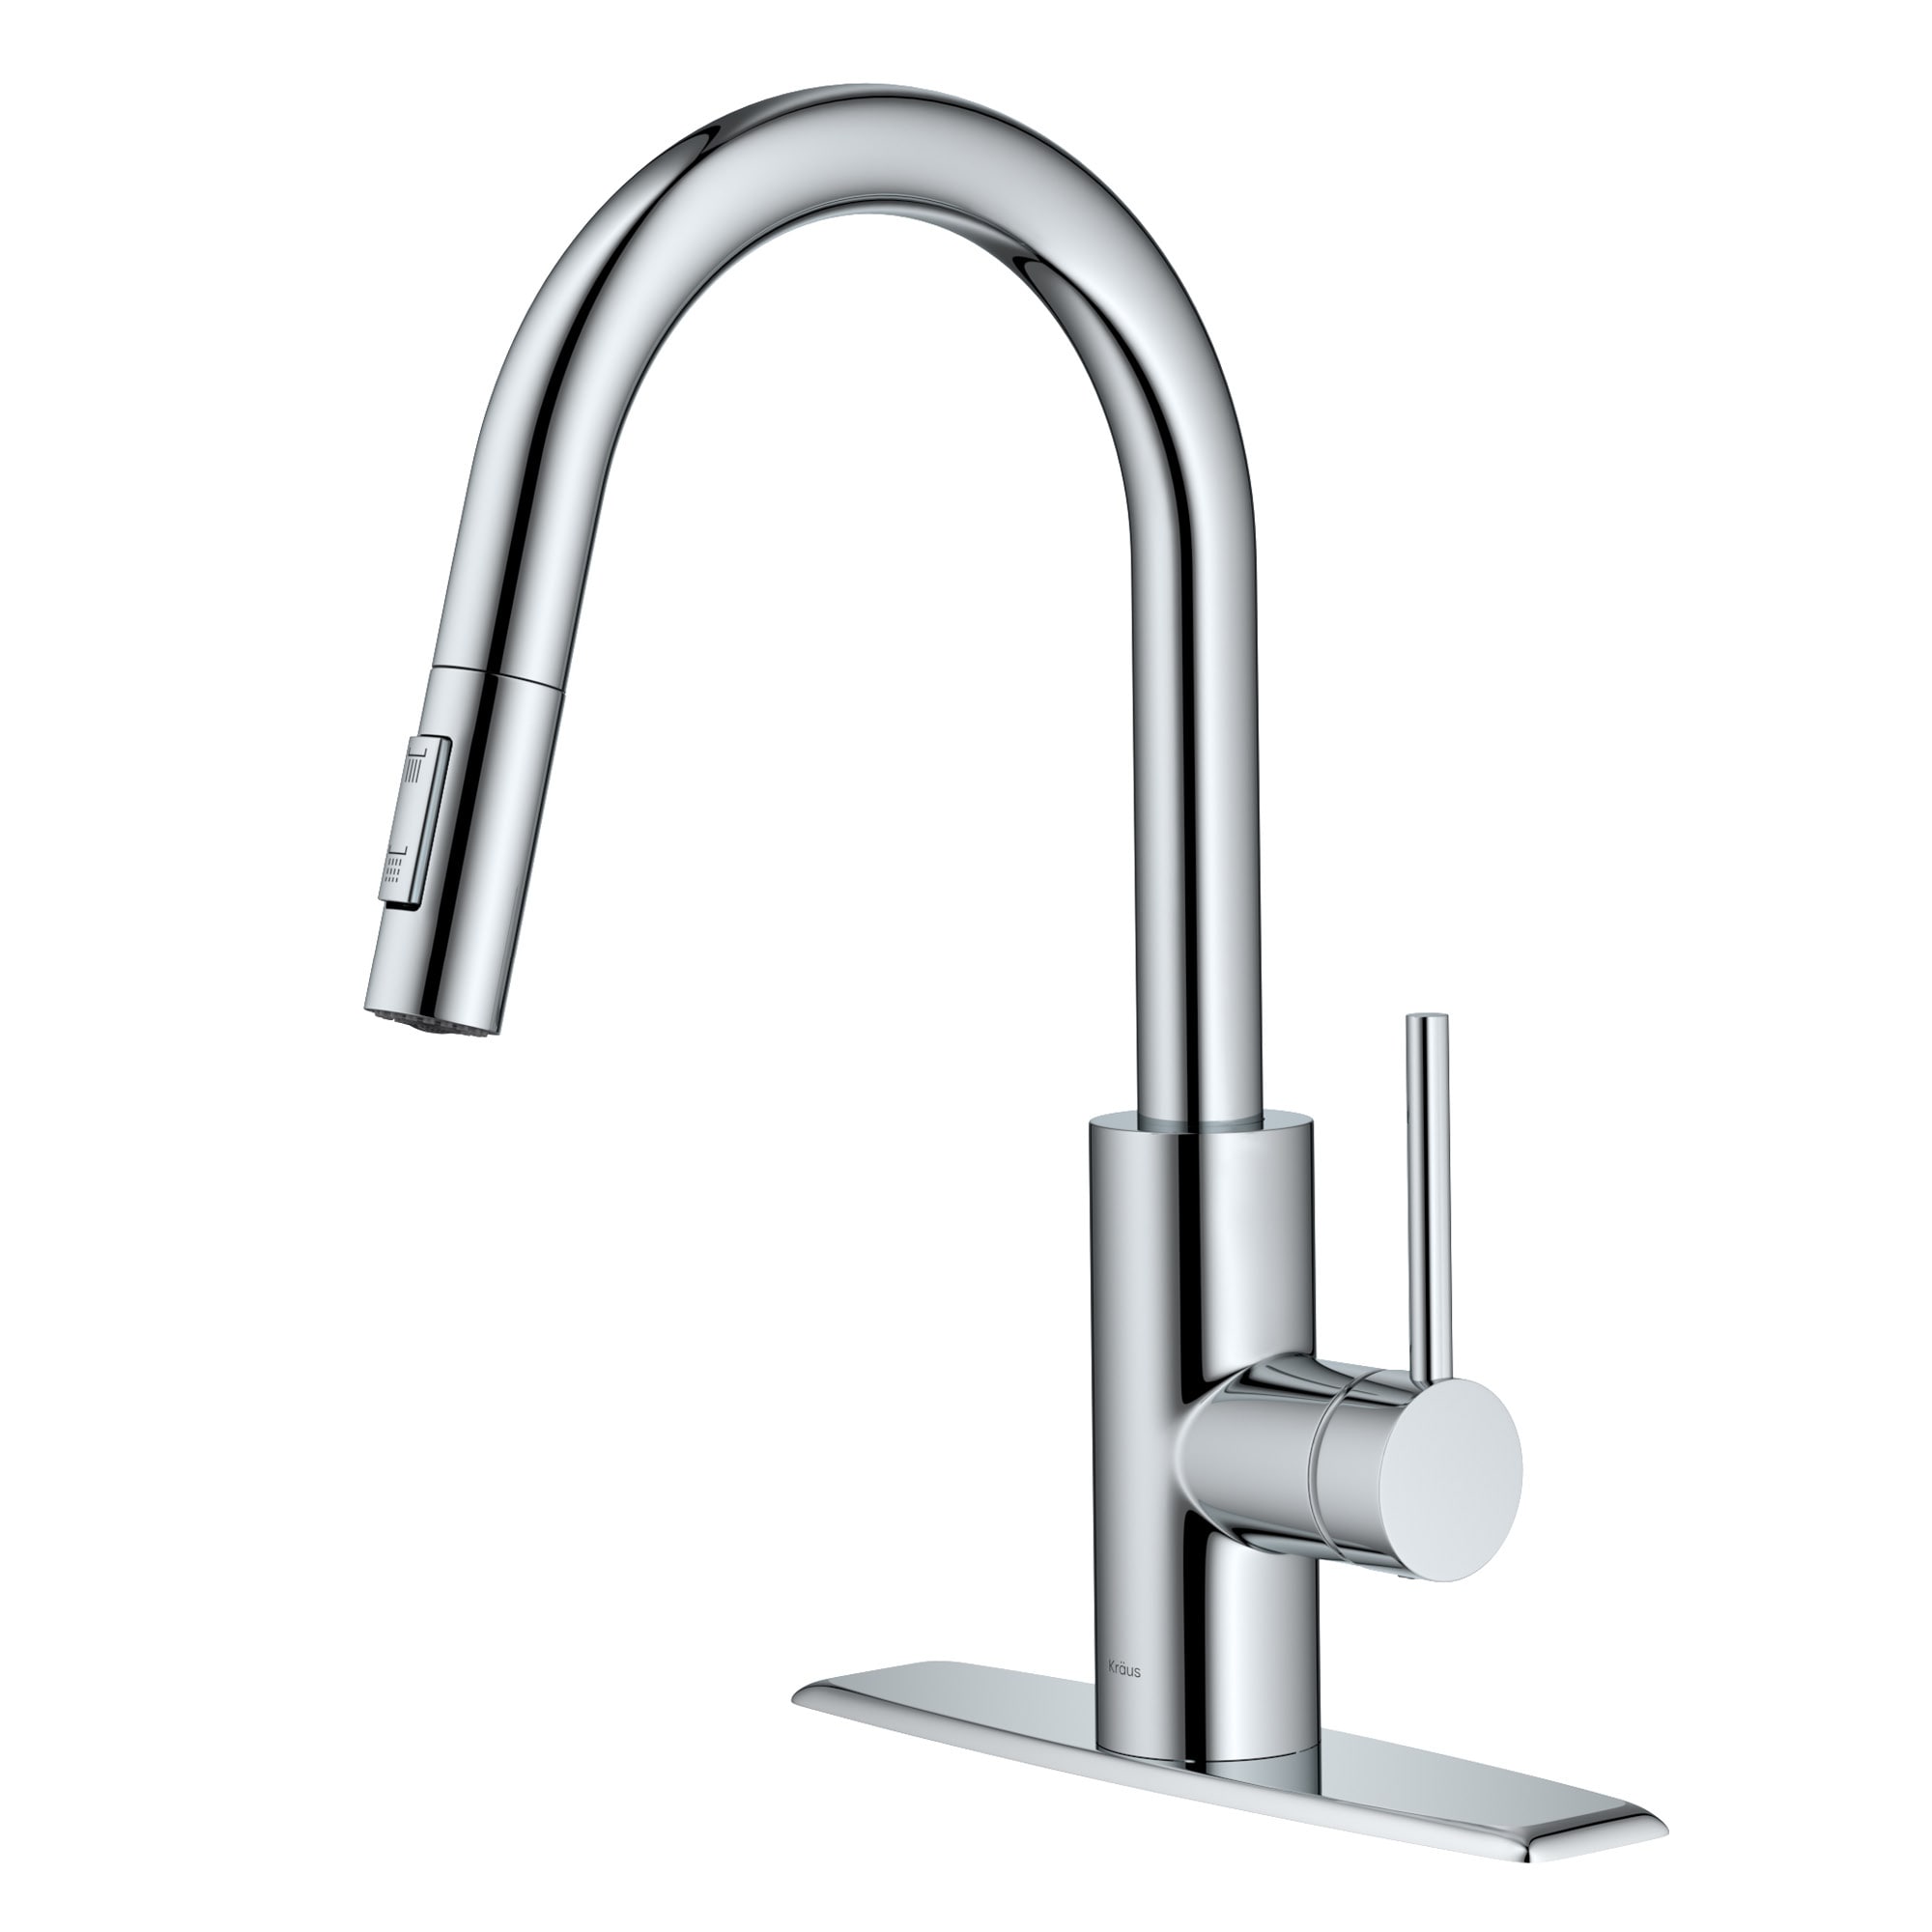 Kraus Oletto Chrome Single Handle Pull-down Kitchen Faucet with